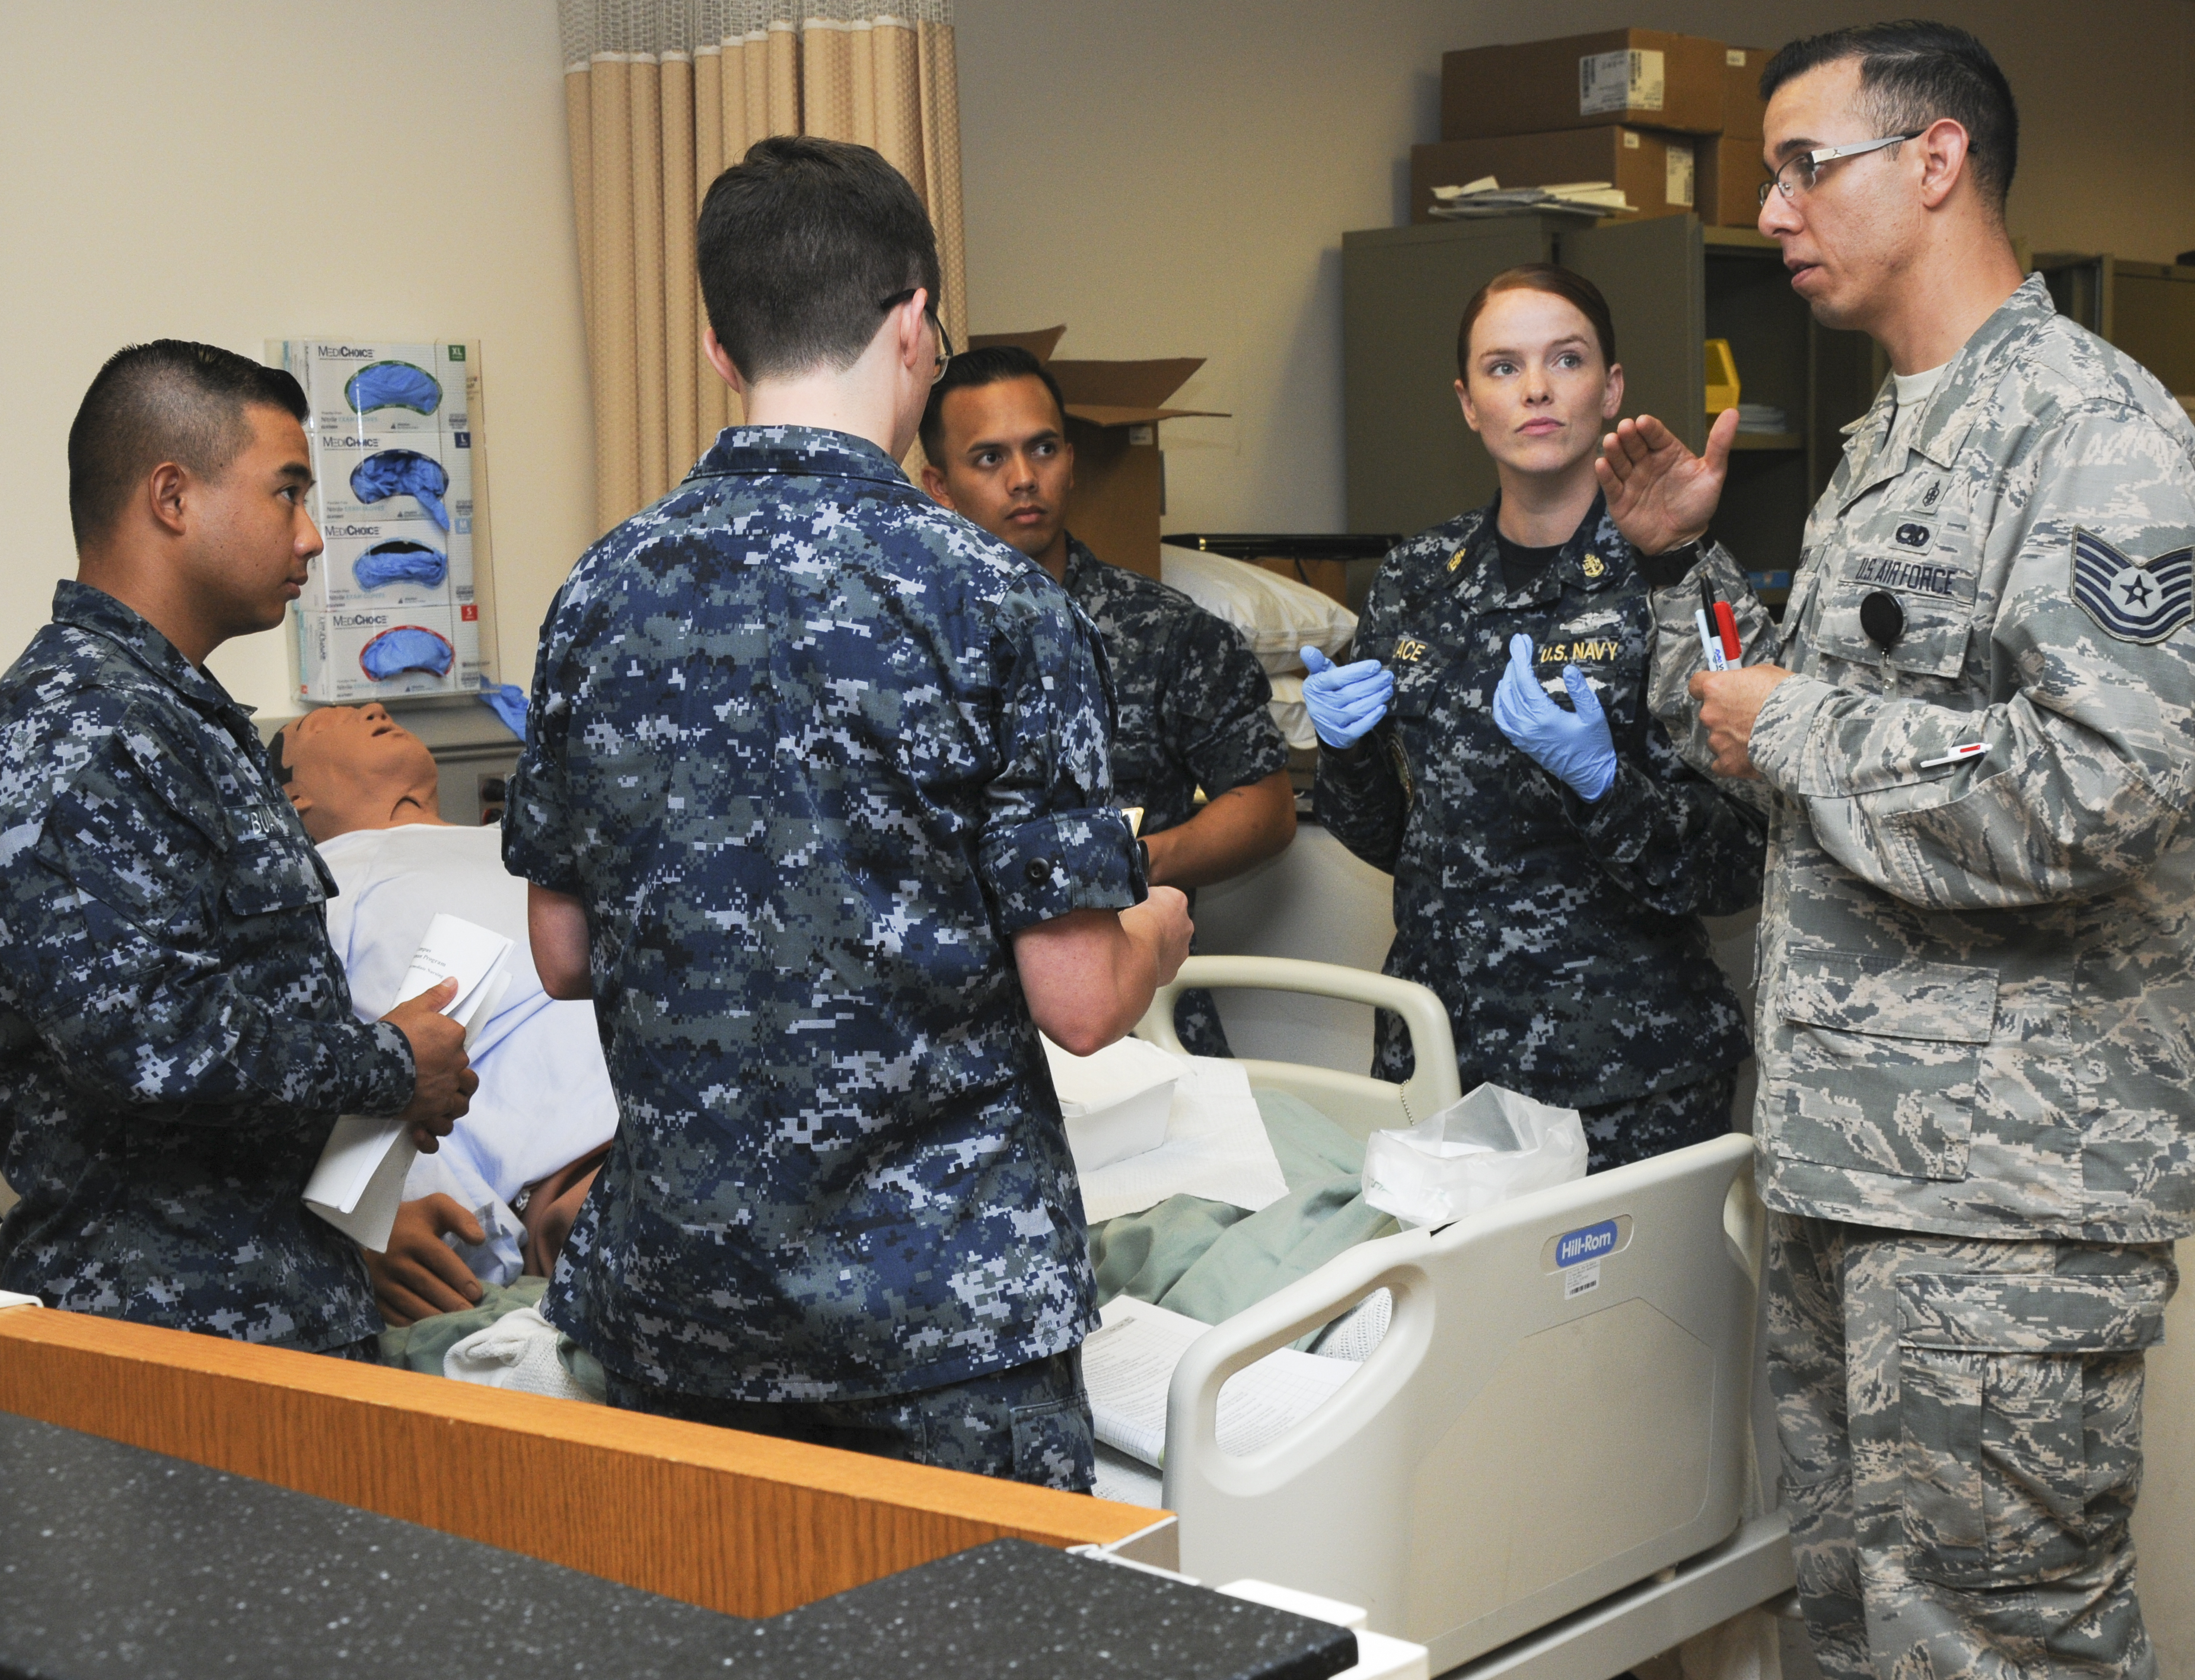 SAN ANTONIO (Sept. 20, 2016) Air Force Tech. Sgt. Rey Meza, an instructor at the Medical Education and Training Campus (METC), talks to students alongside his fellow instructor, Chief Hospital Corpsman Jacklyn Place, during a nursing lab portion of the Basic Medical Technician Corpsman Program (BMTCP) at METC on Joint Base San Antonio - Fort Sam Houston. The joint program prepares Navy hospital corpsman and Air Force medical technicians with the basic medical knowledge to perform in an emergency or nursing scenario. (U.S. Navy photo by Mass Communication Specialist 1st Class Jacquelyn D. Childs)